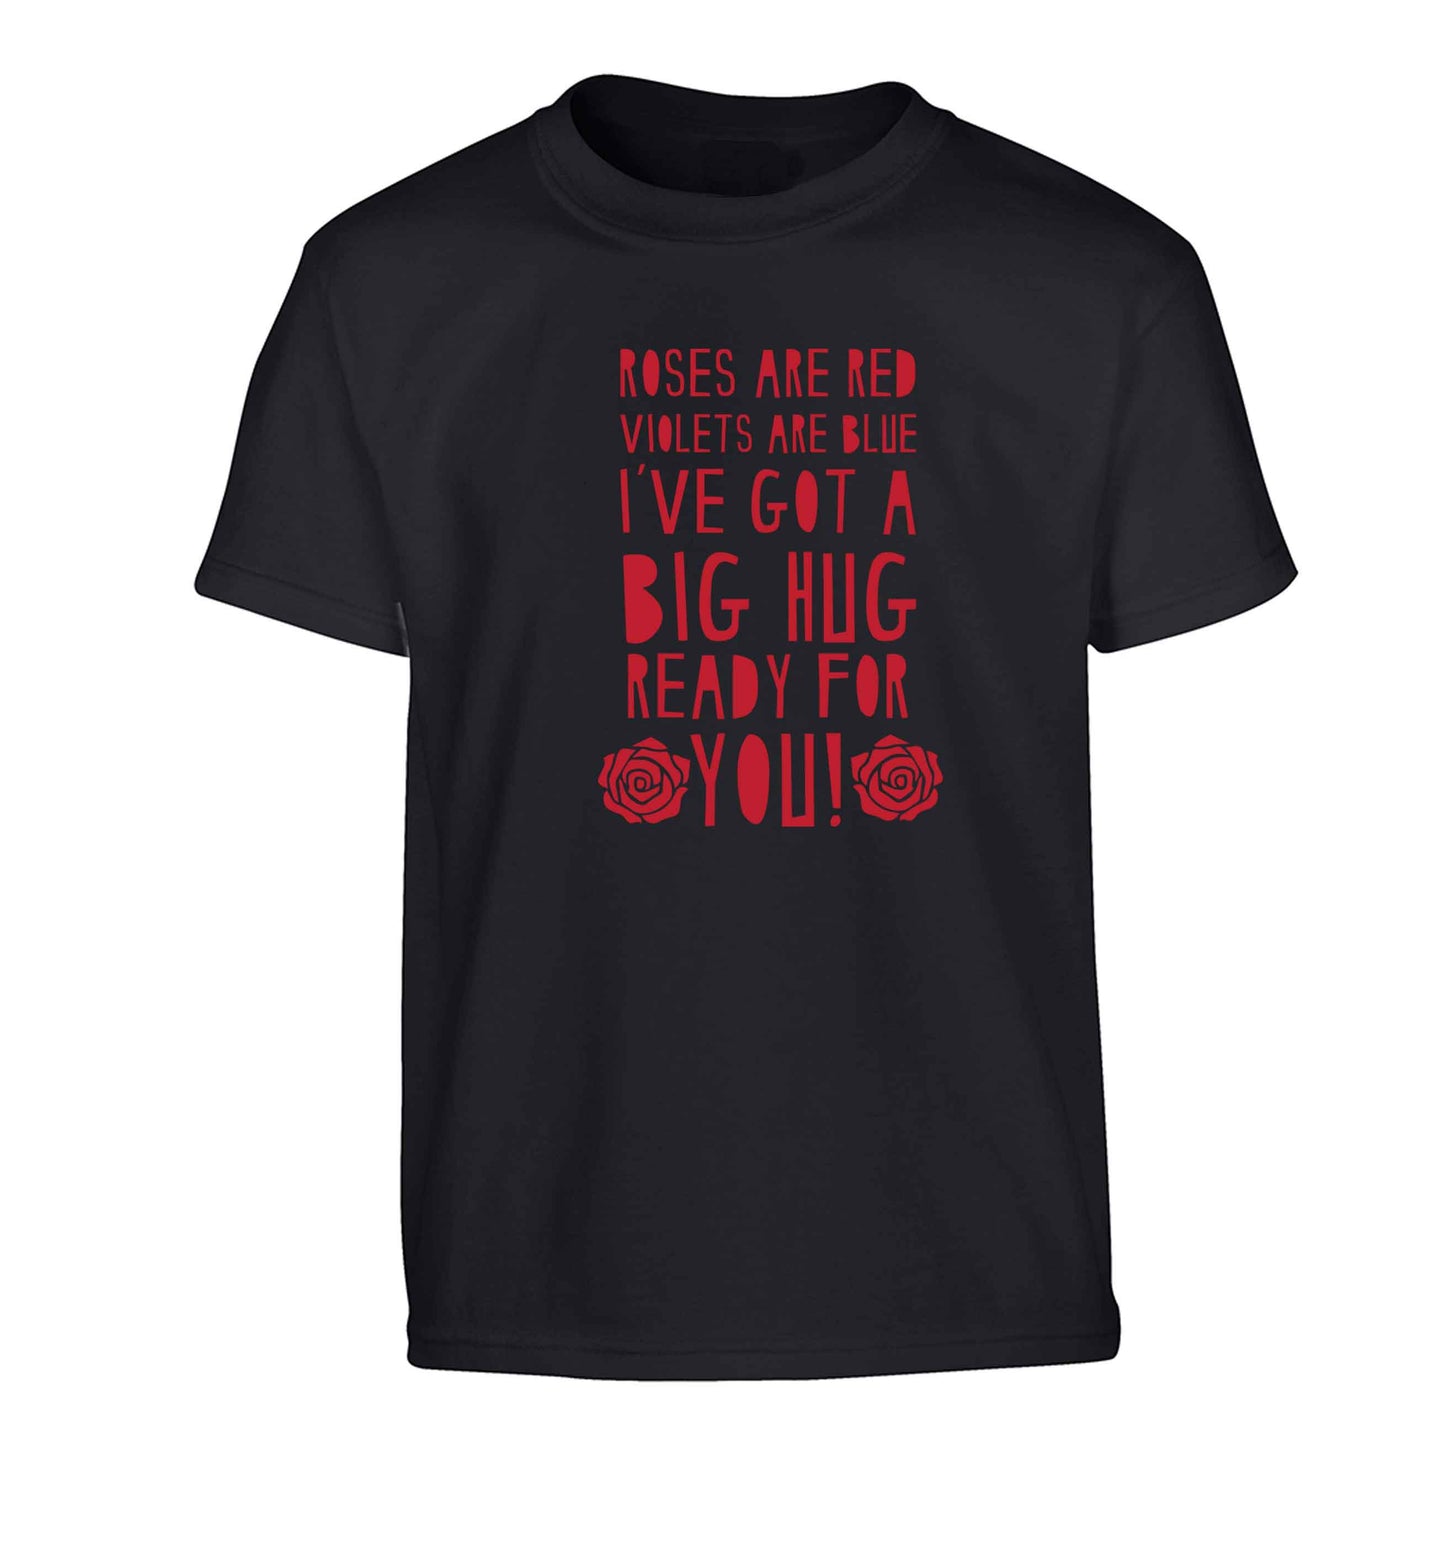 Roses are red violets are blue I've got a big hug coming for you Children's black Tshirt 12-13 Years